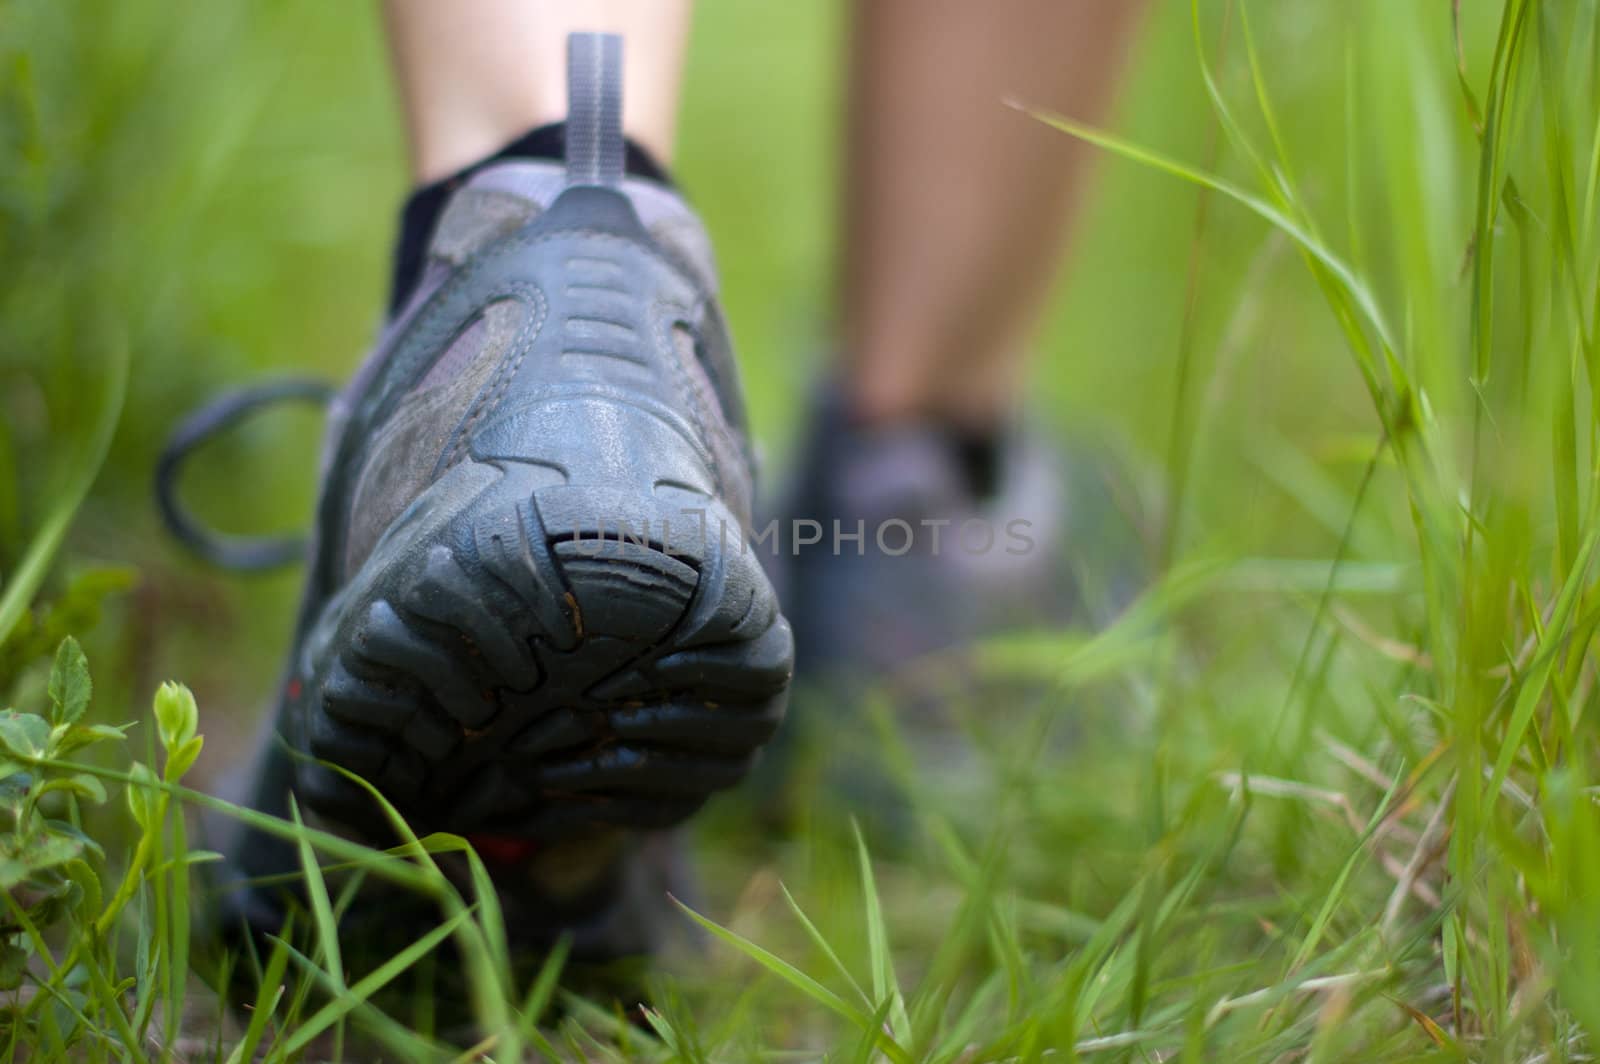 Closeup of a hiking boots in a grass